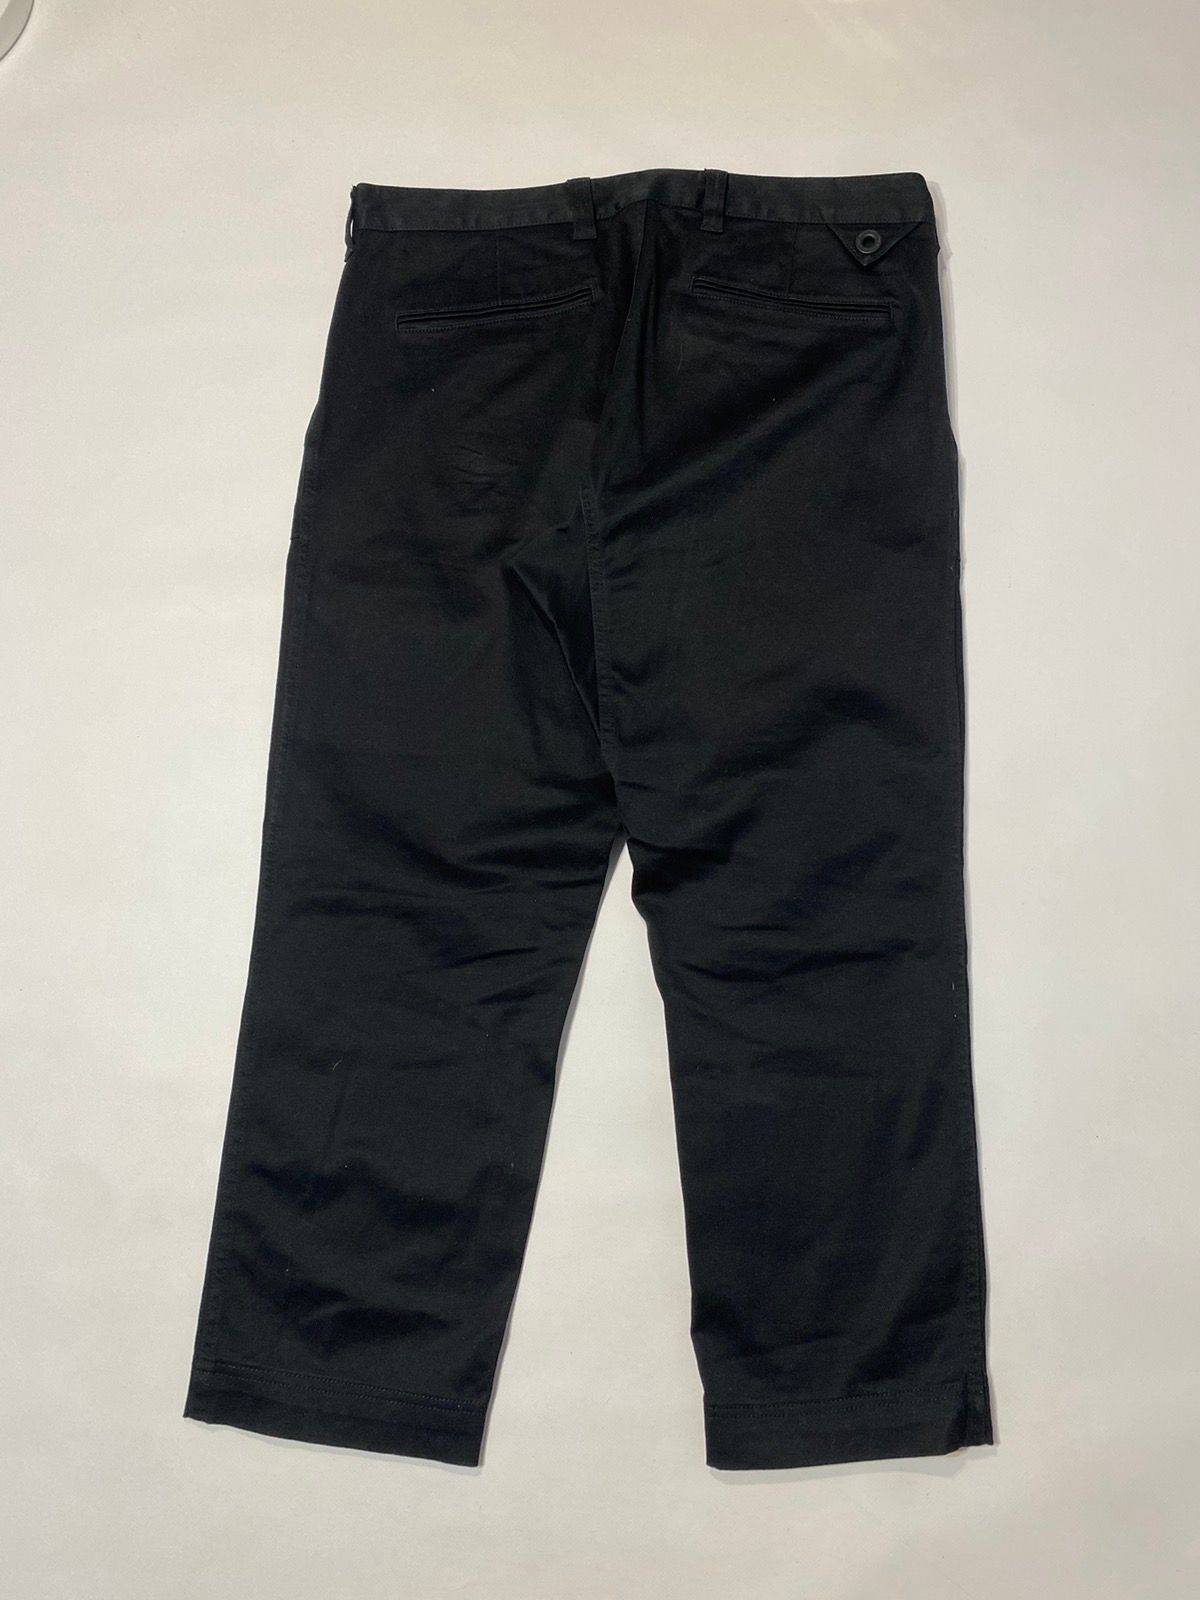 White Mountaineering MADE IN JAPAN White Moutaineering Casual Black Pants Size US 34 / EU 50 - 11 Thumbnail